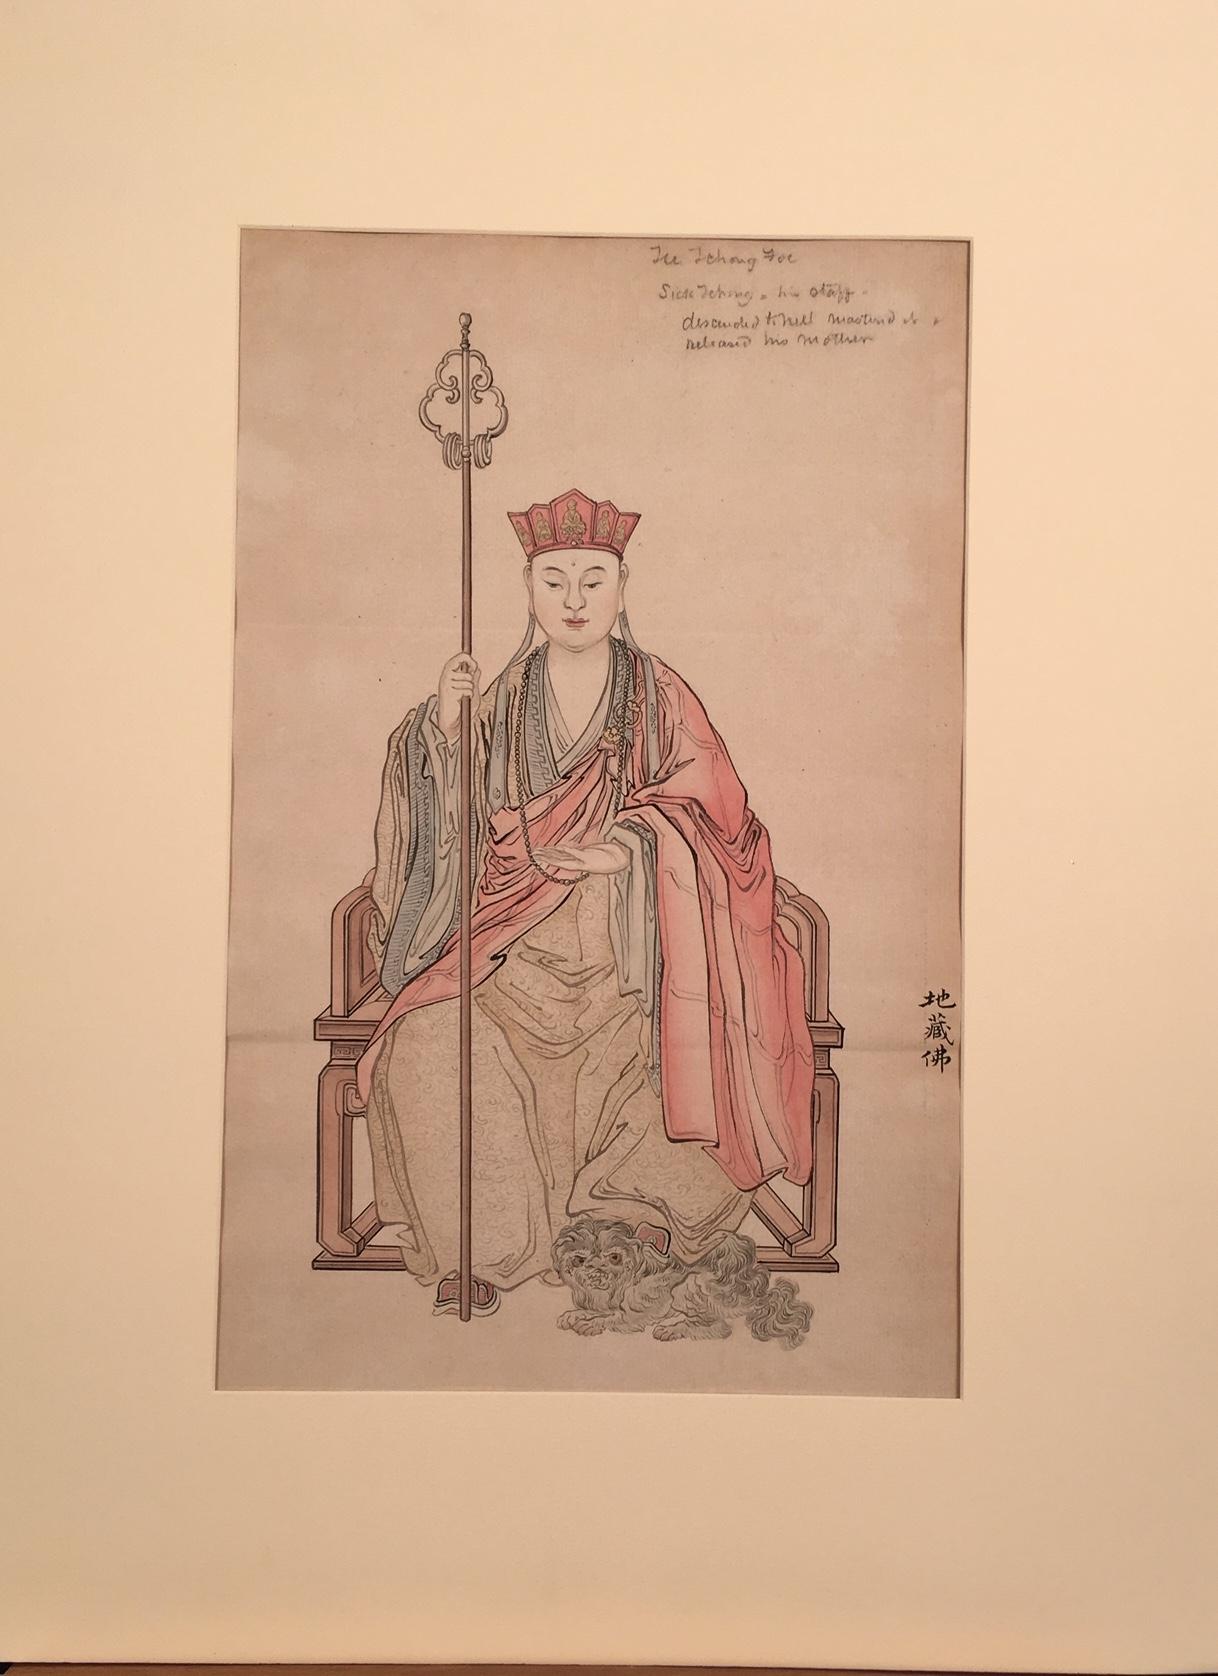 Unknown Figurative Painting - Portrait of a High Ranking Asian Official or Religious Figure